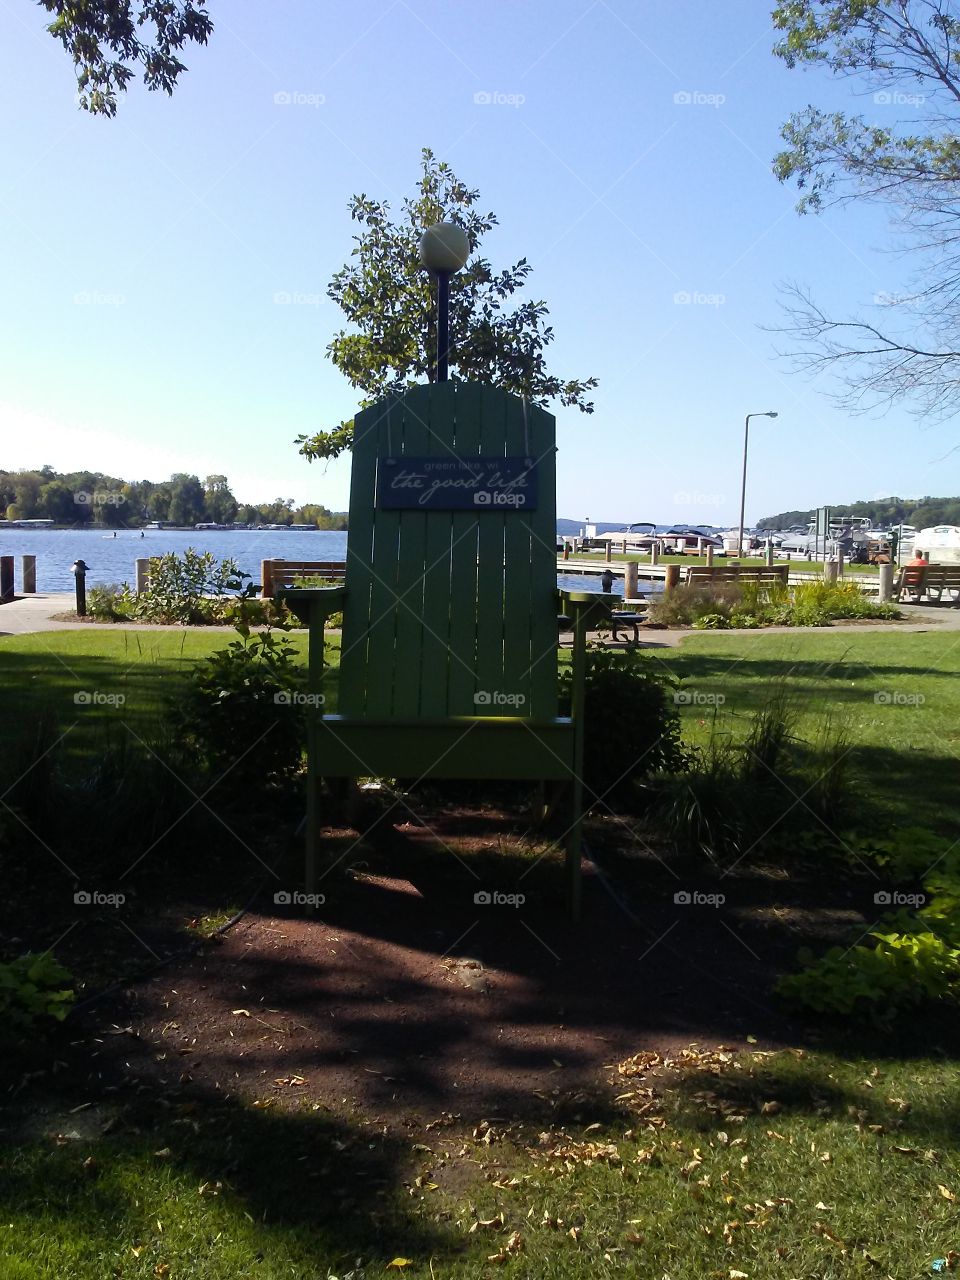 A big chair at a city park in Green Lake, Wisconsin.